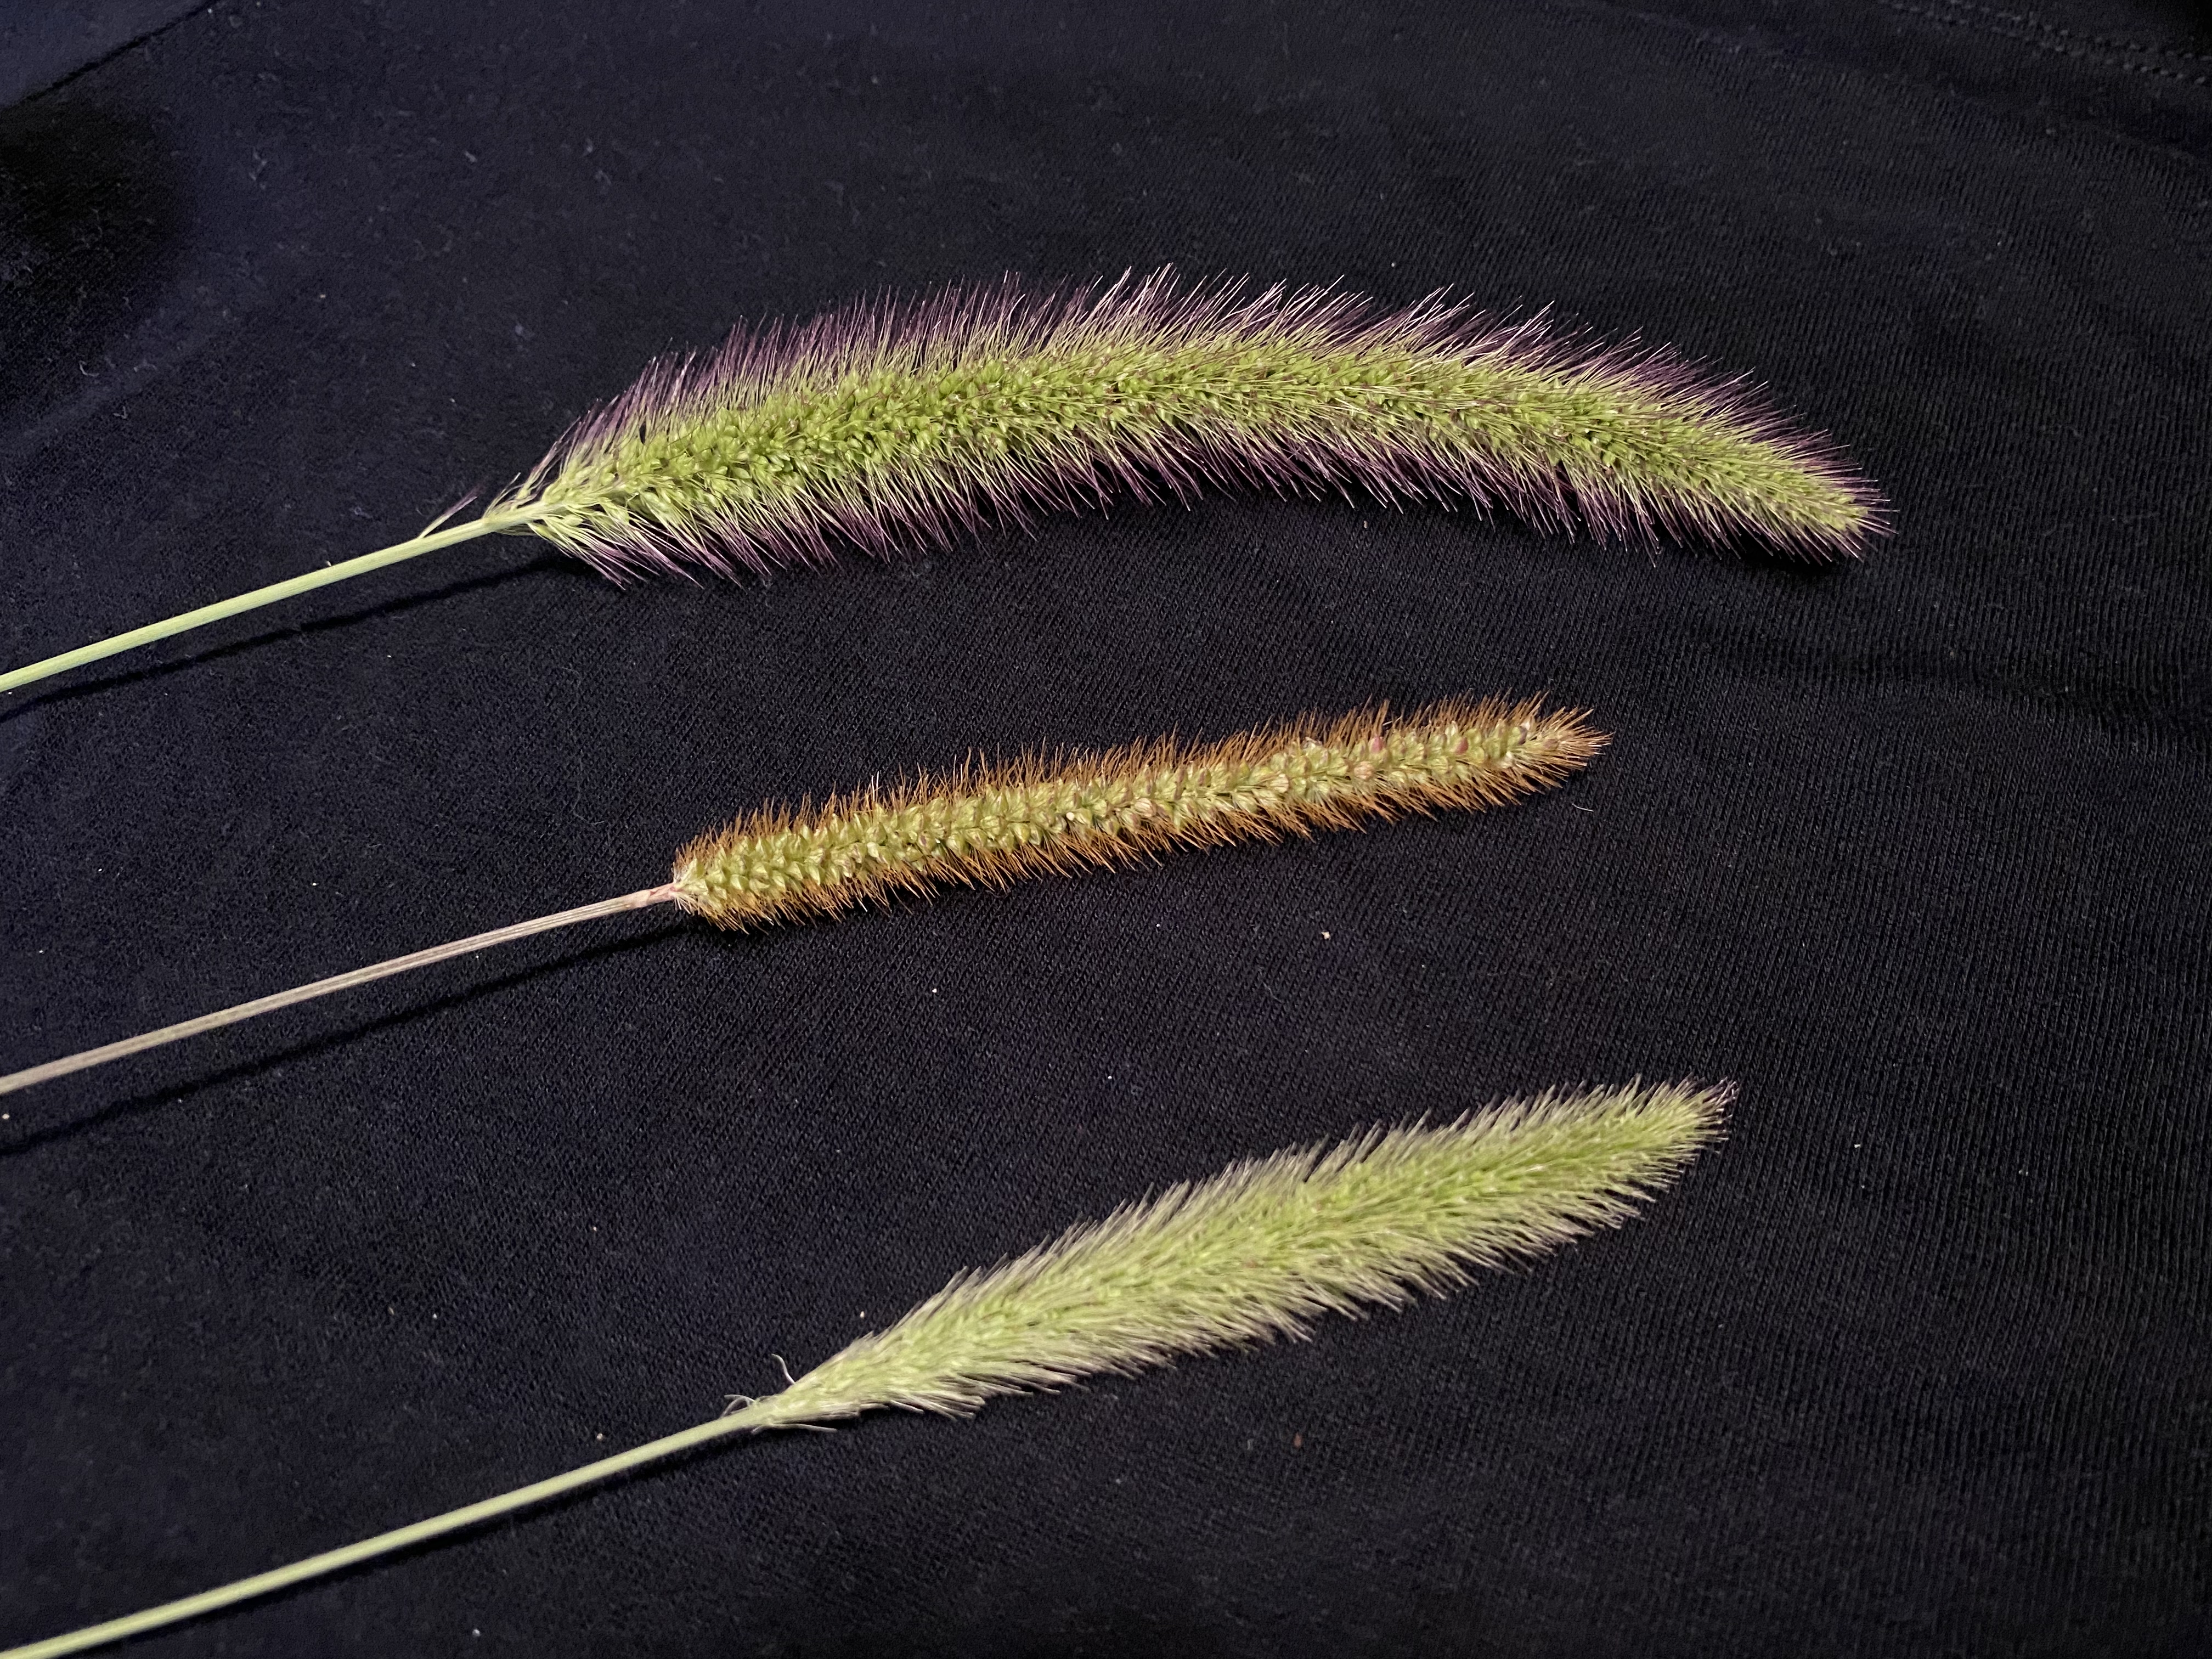 Seedheads of foxtail plants.